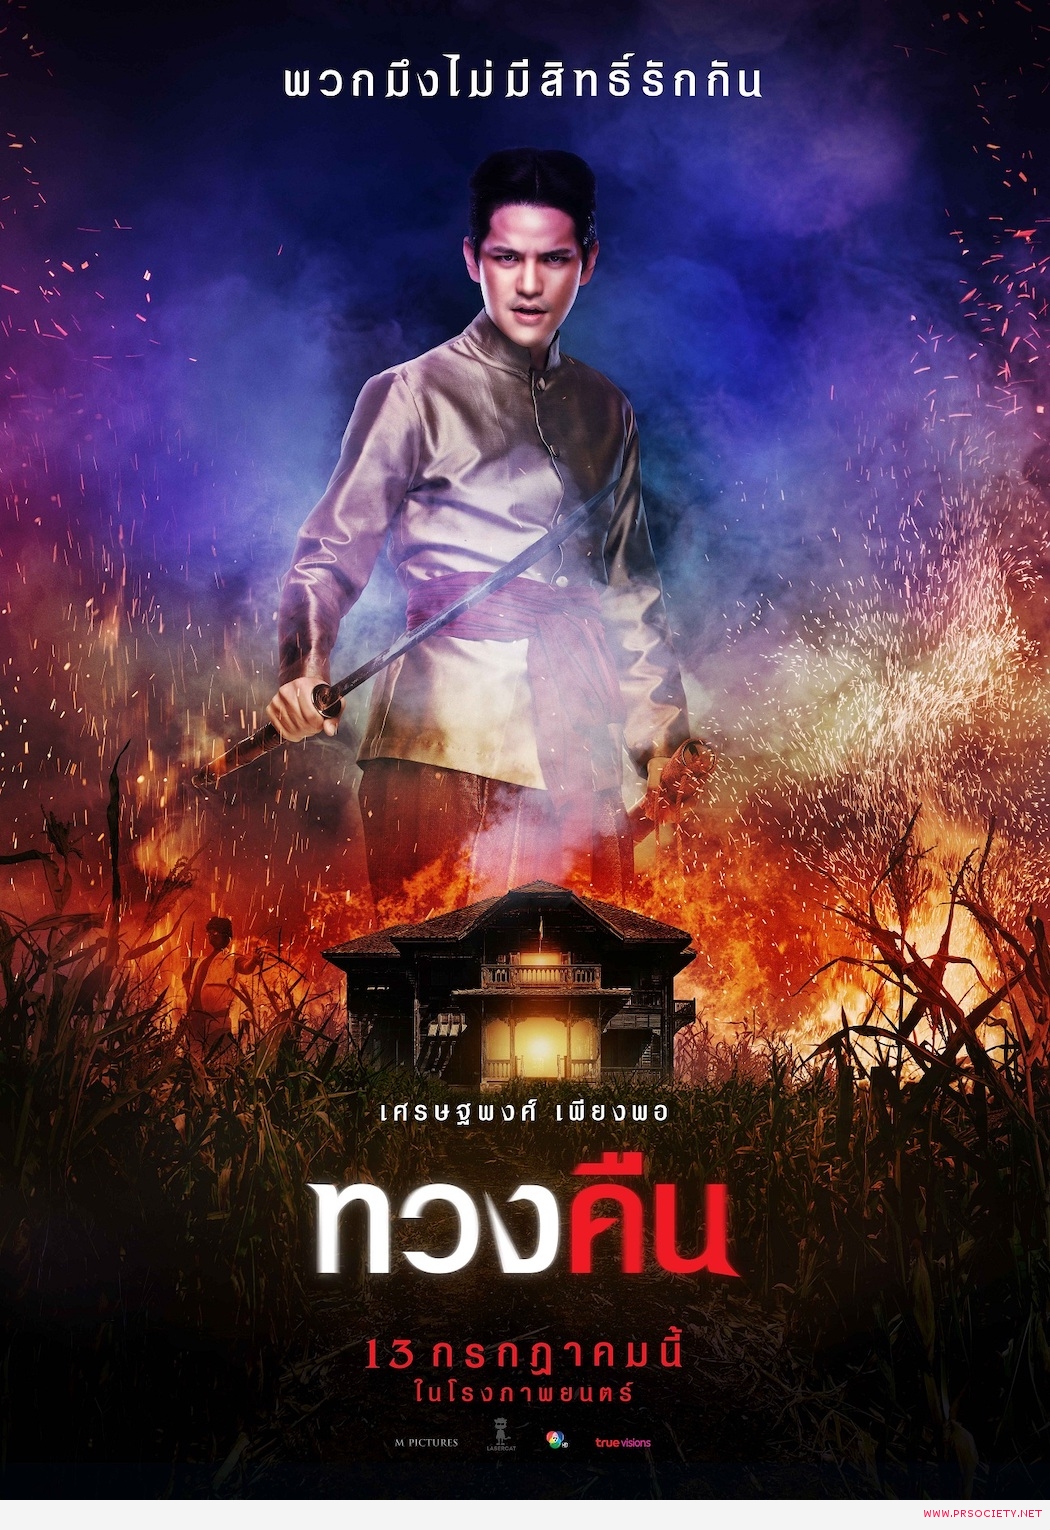 005_poster-ทวงคืน-characters-เต๋า